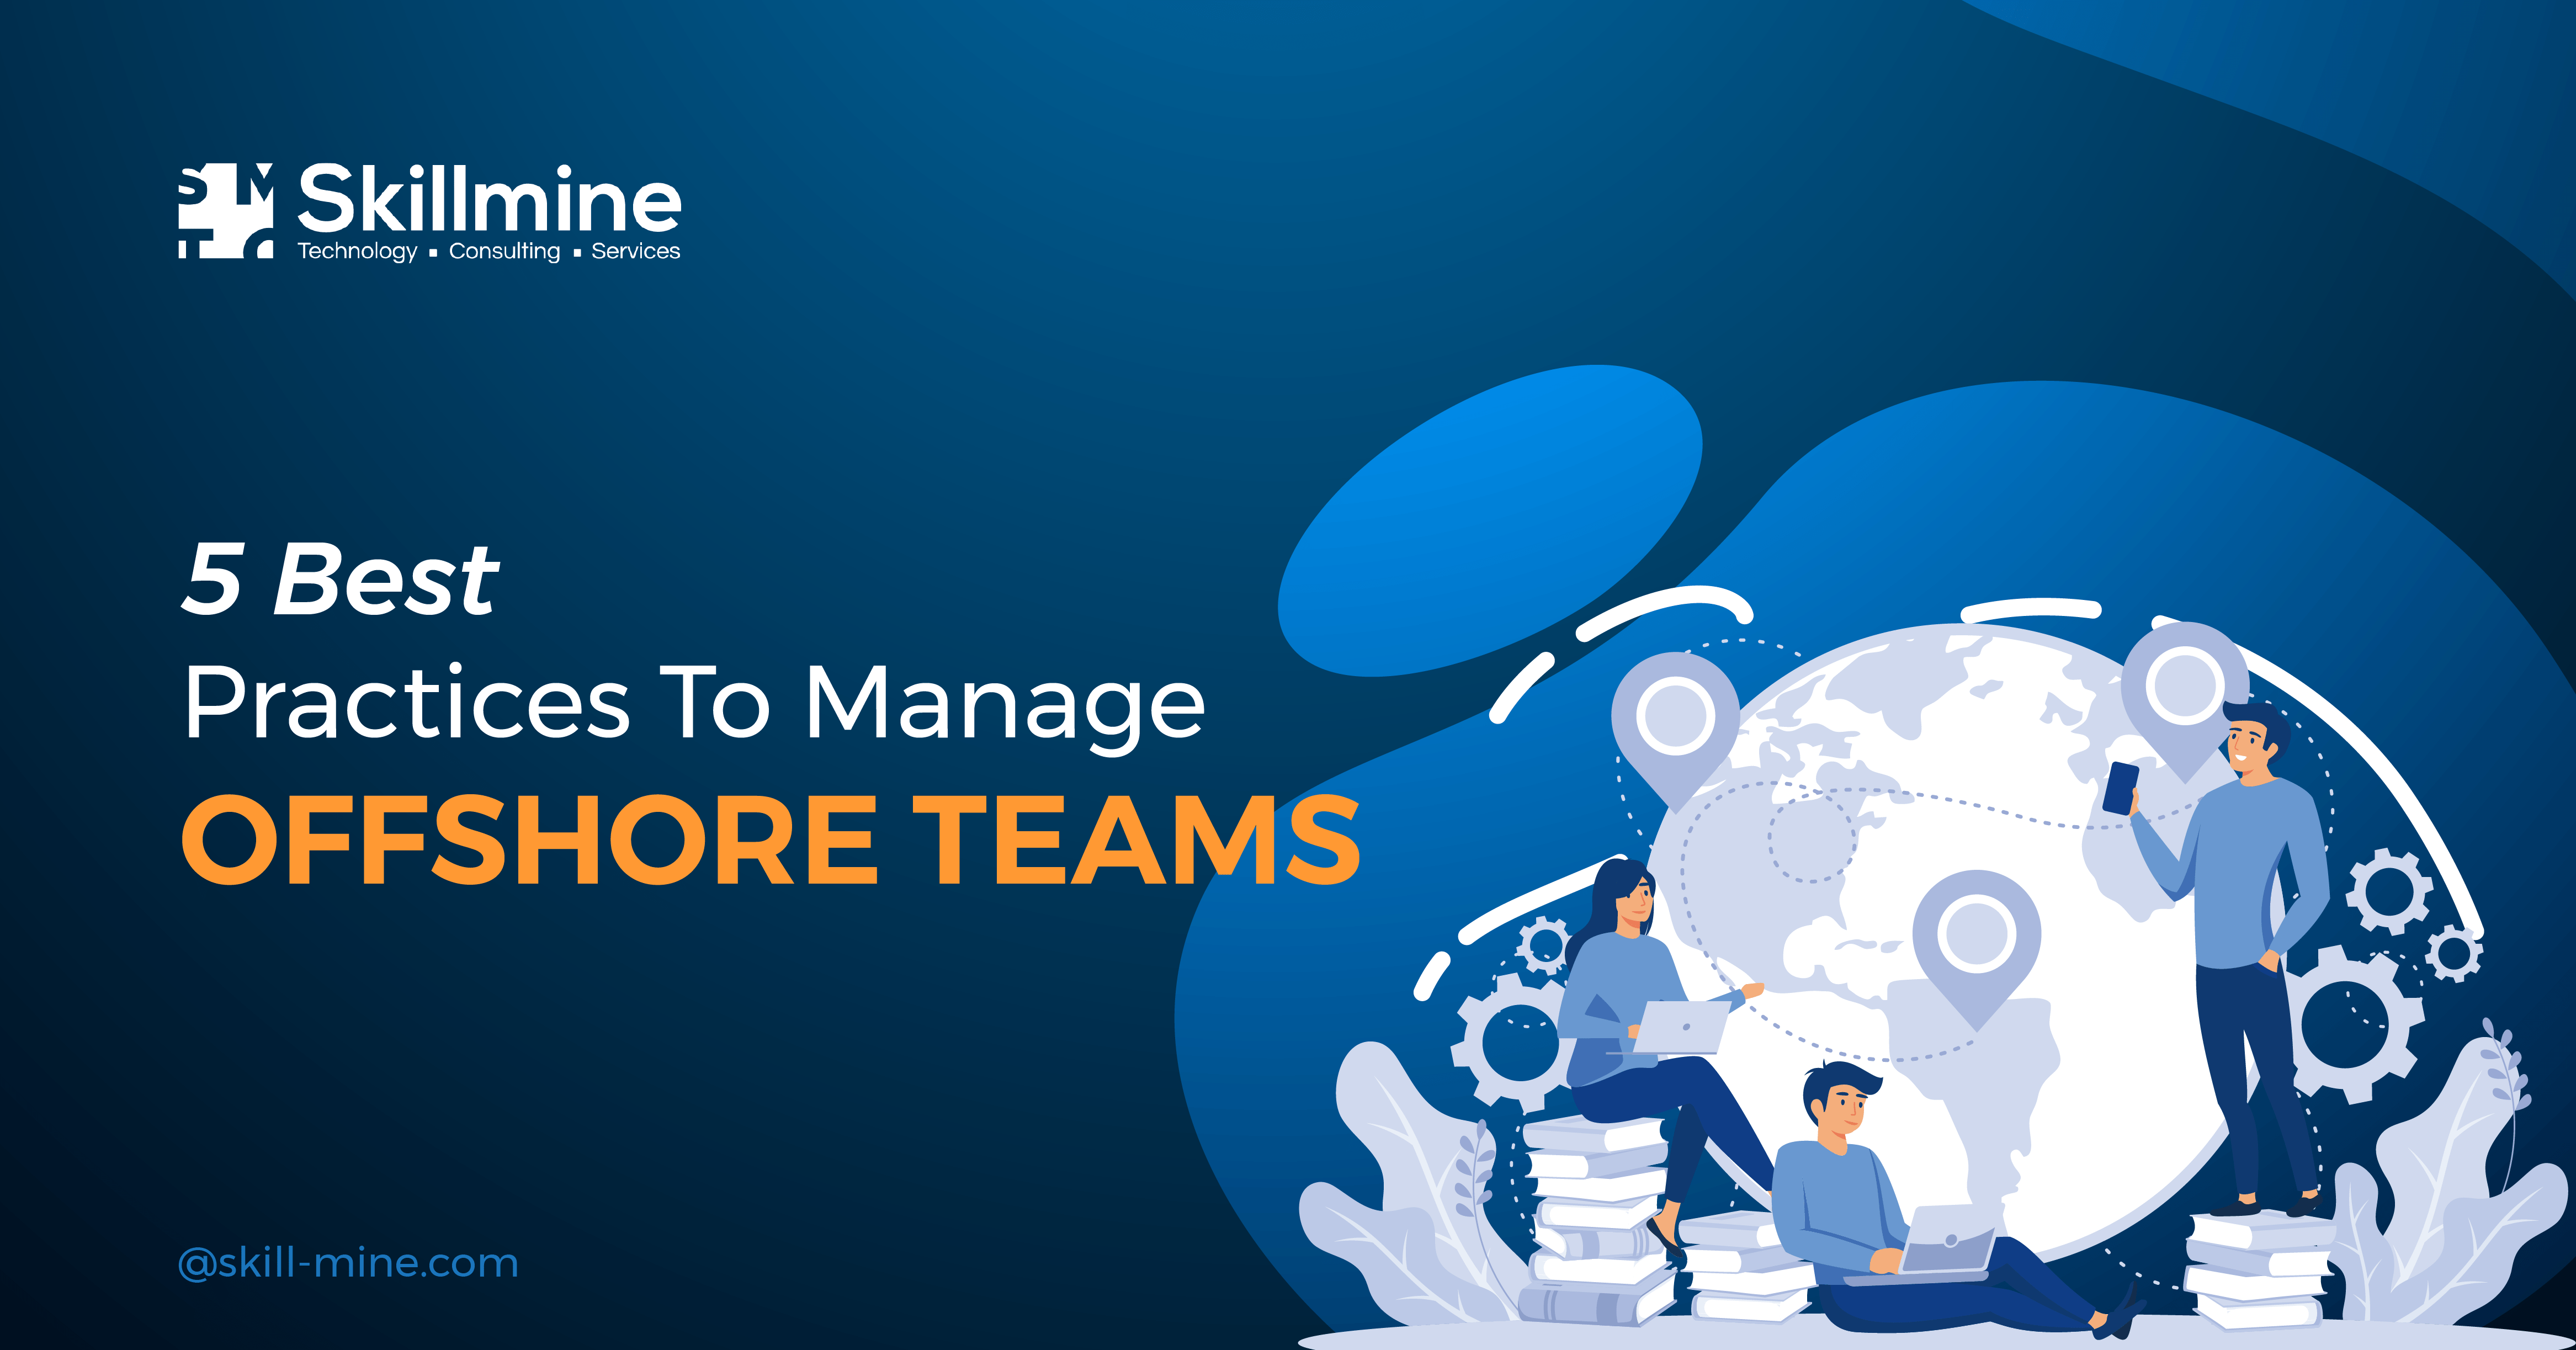 5 Best Practices To Manage Offshore Teams